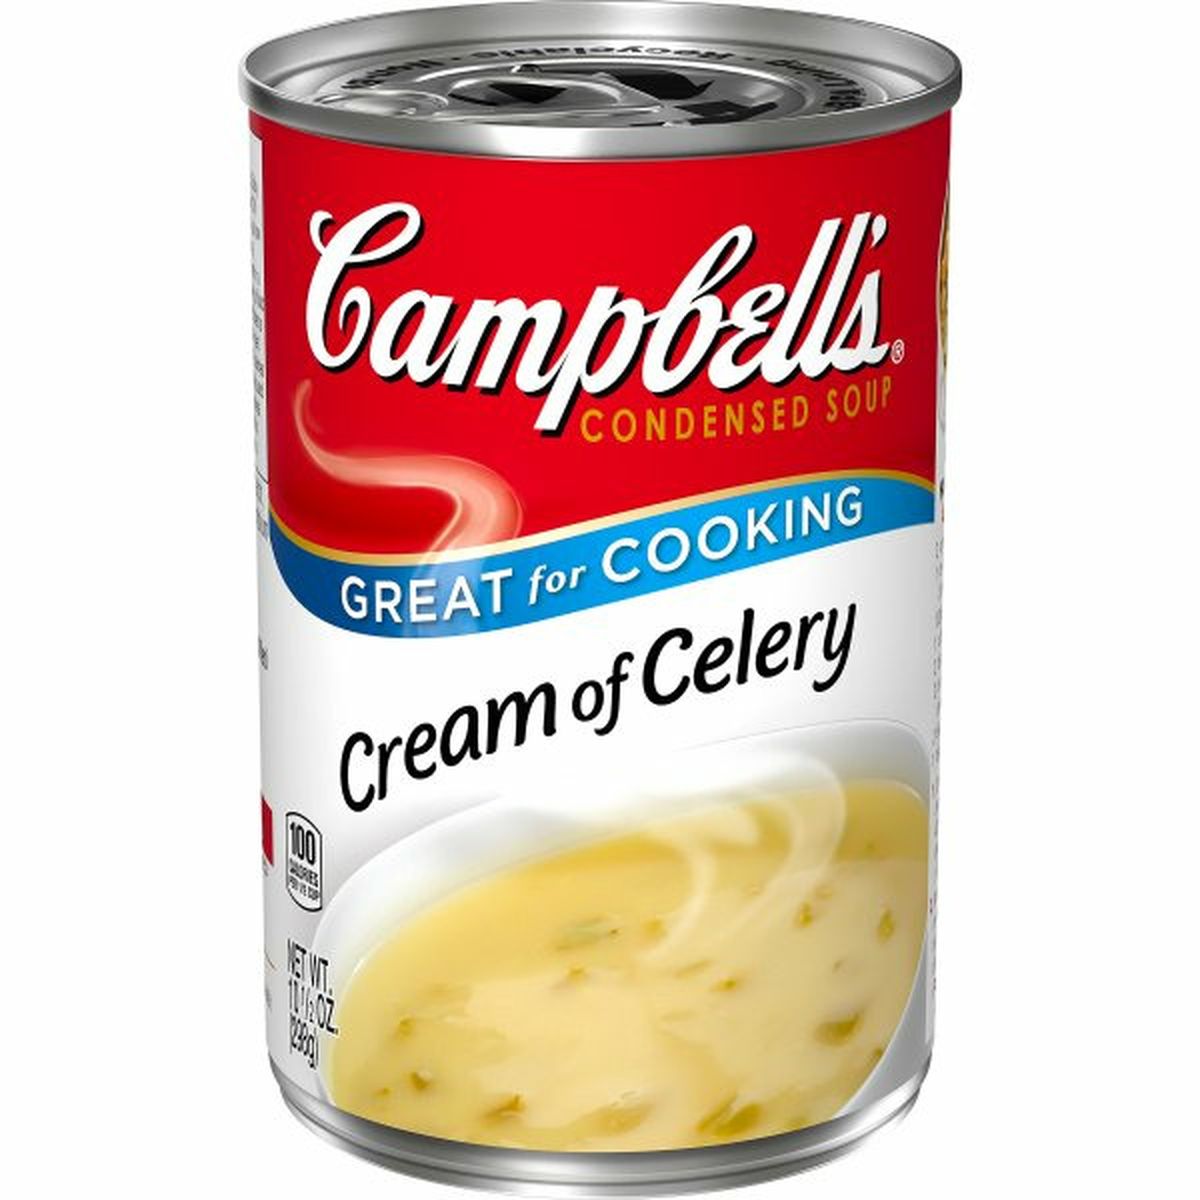 Calories in Campbell'ss Cream of Celery Soup